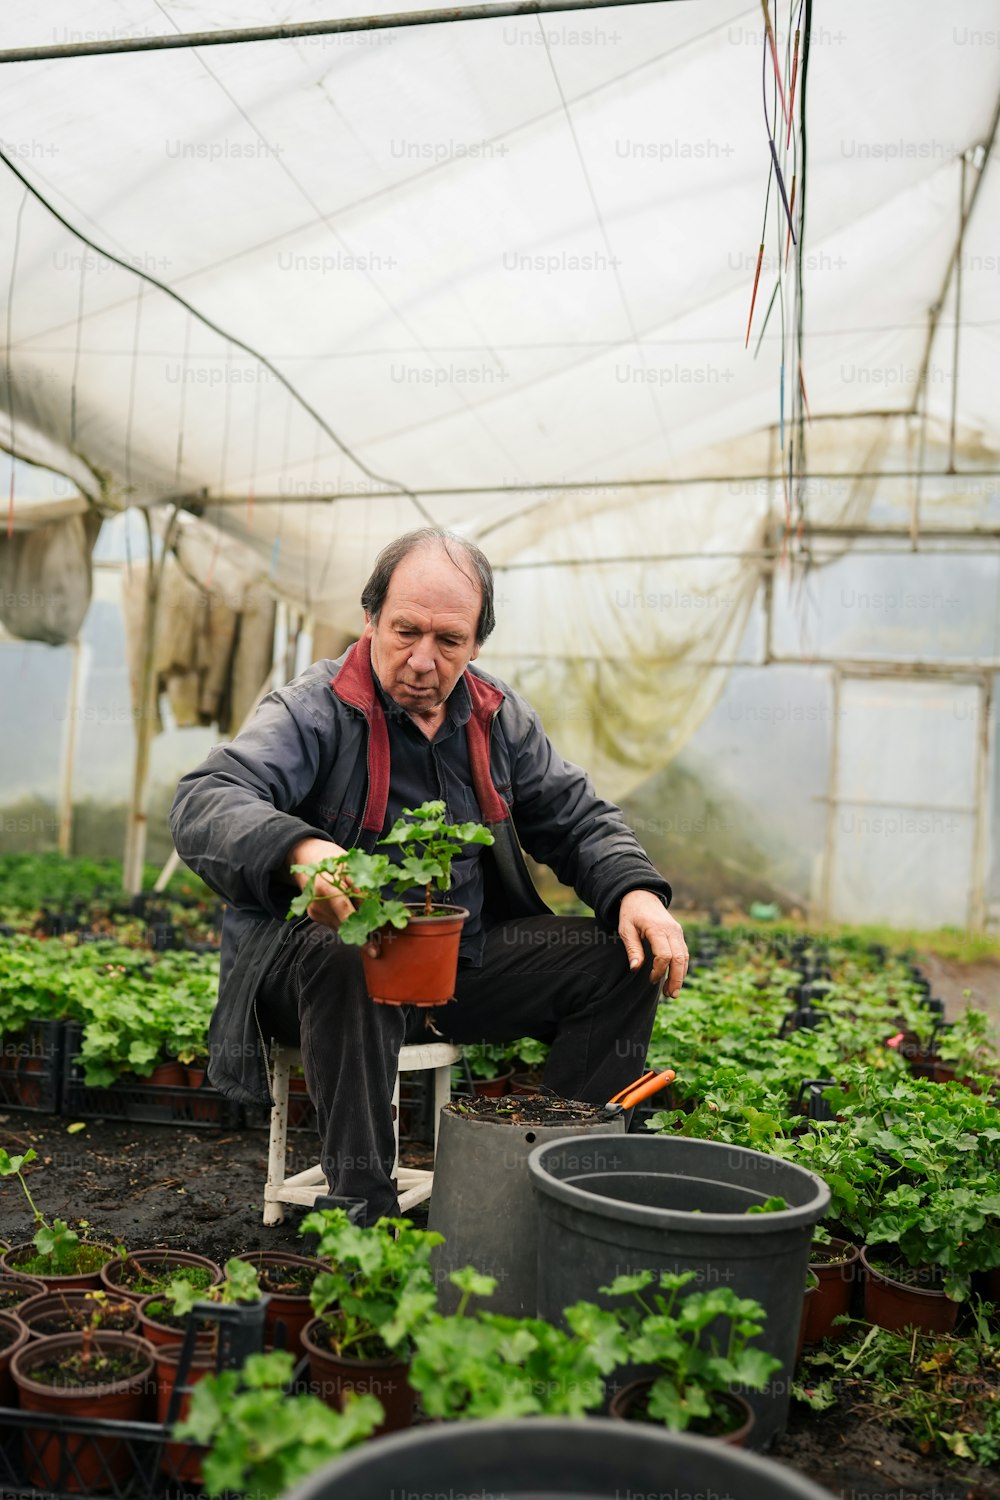 a man kneeling down in a greenhouse holding a carrot